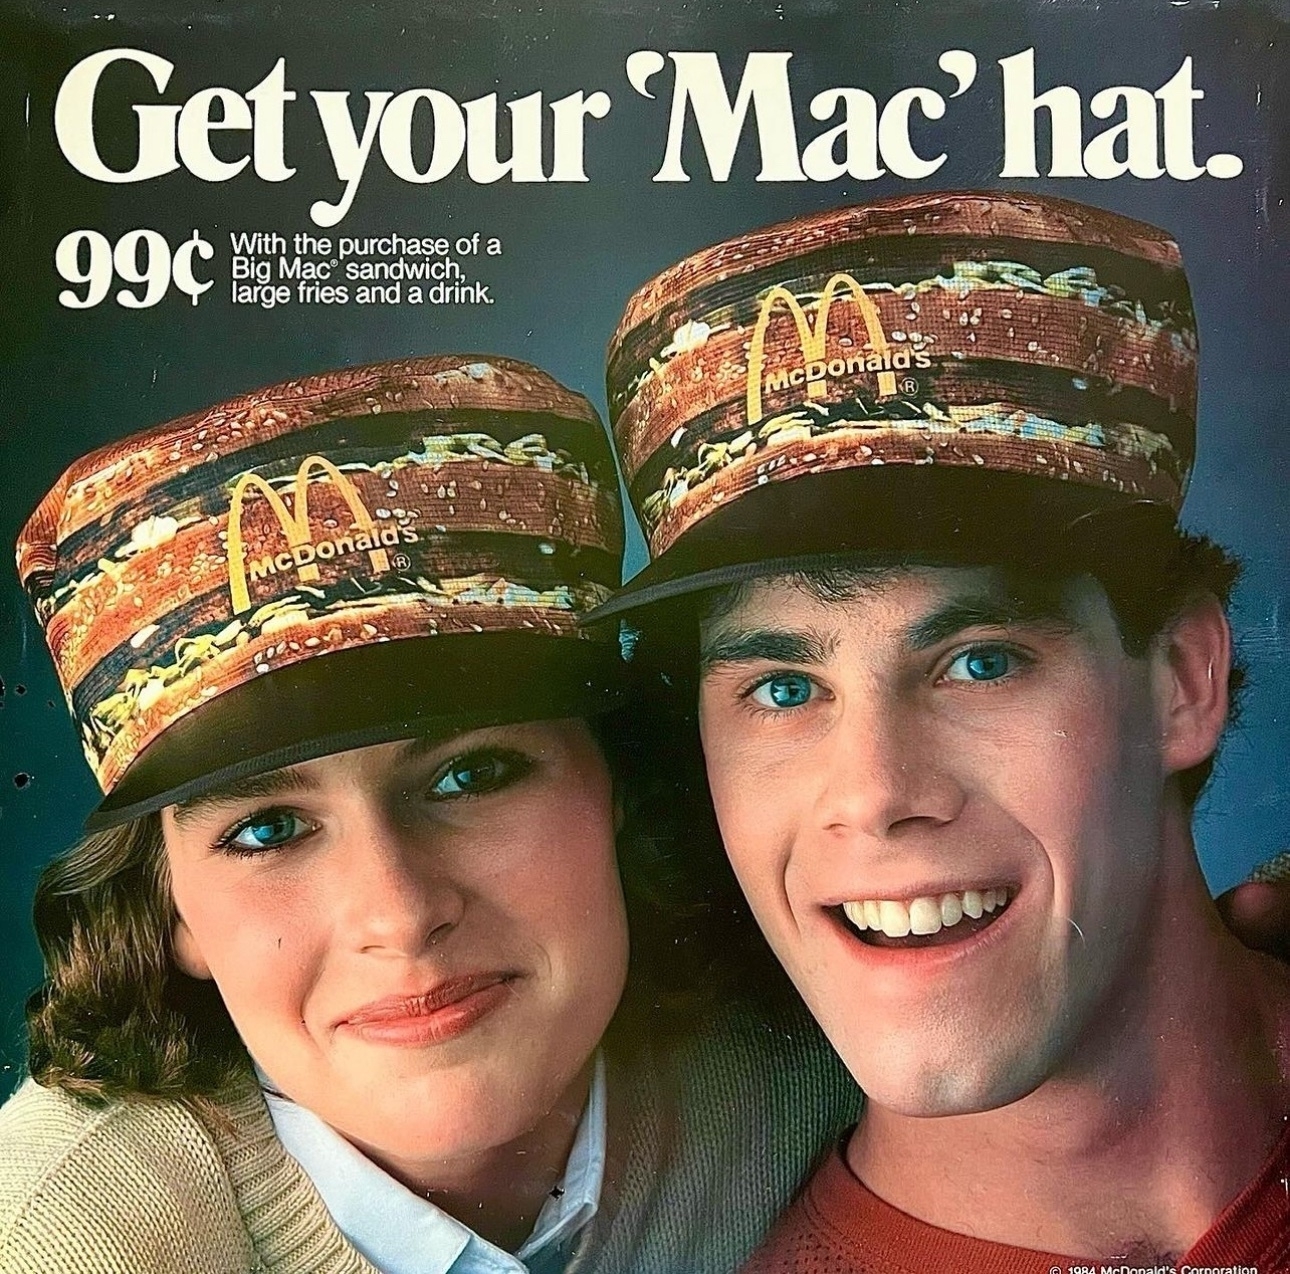 A McDonalds advert for a Big Mac hat 99c with a meal. The hat displays an image of the burgers